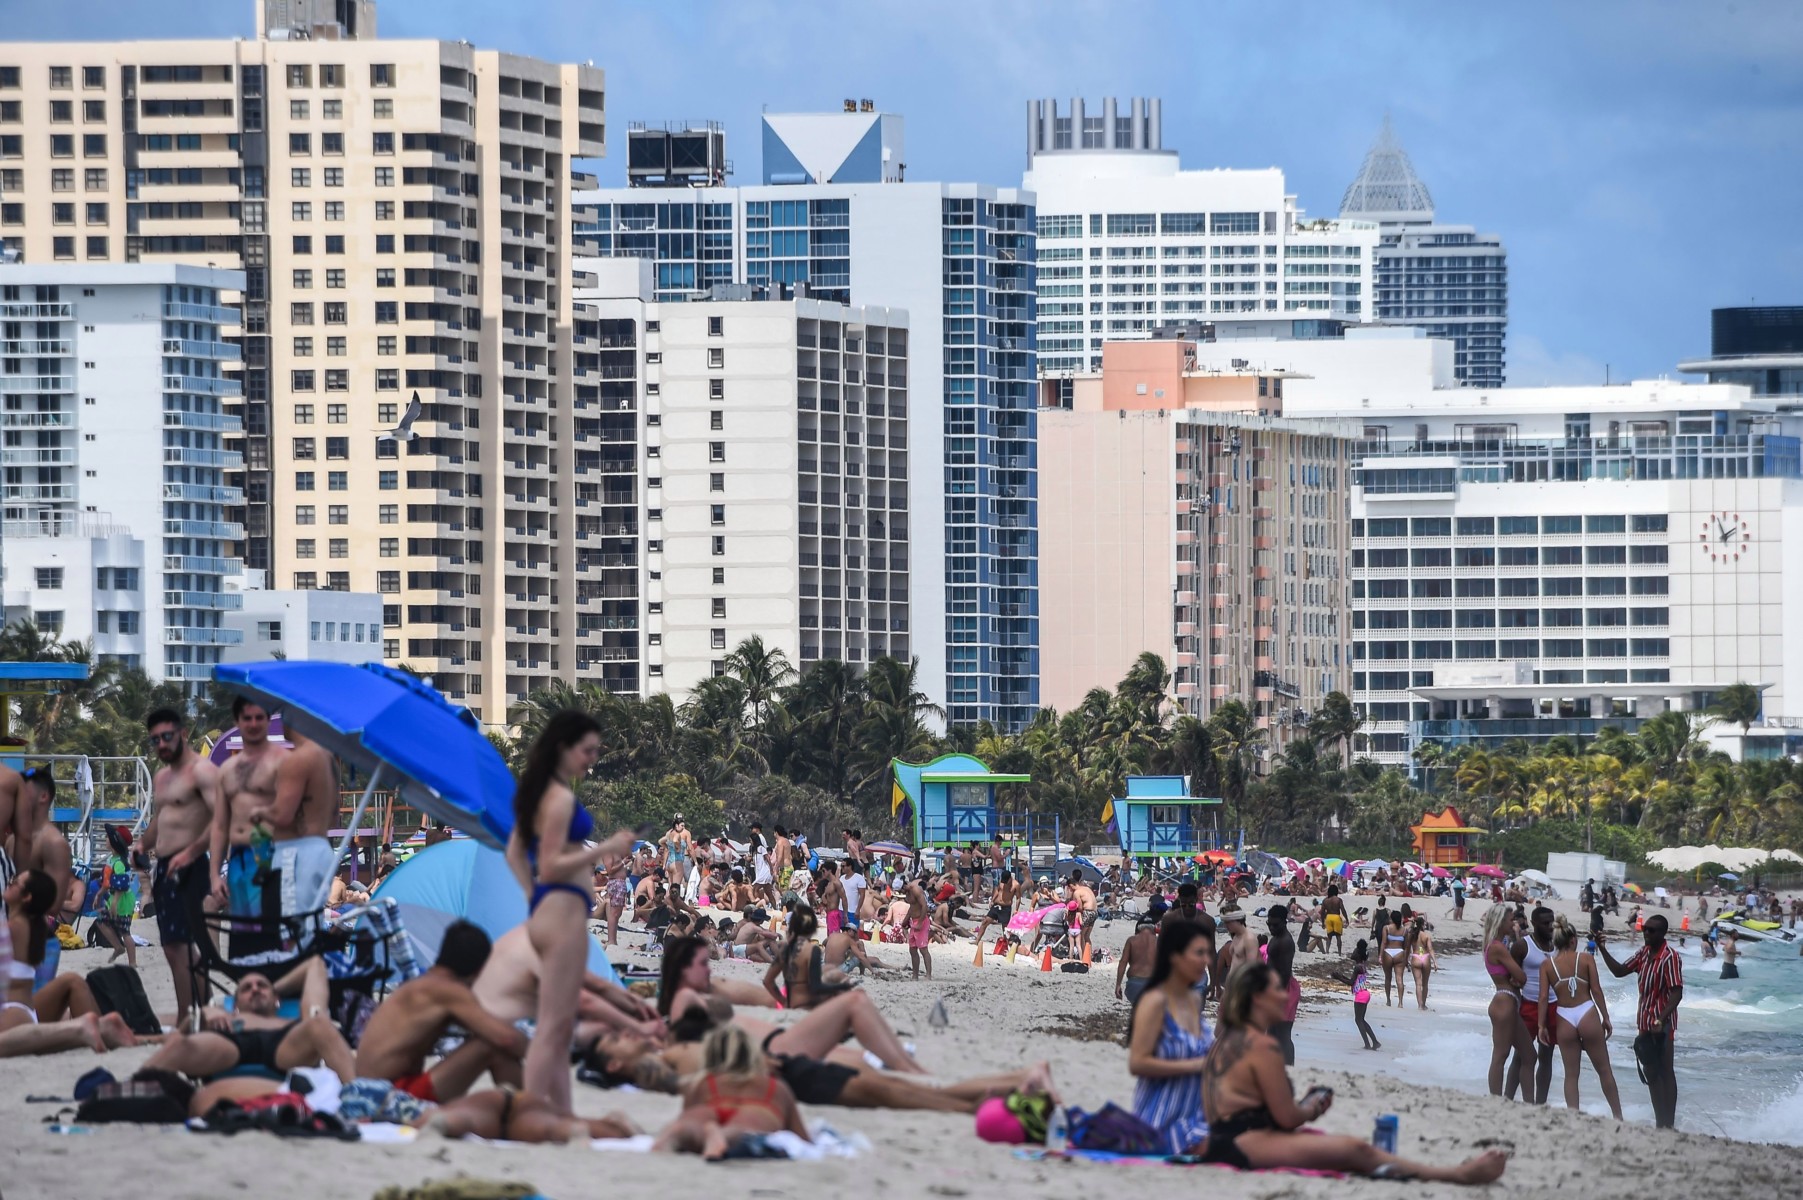 Beaches in Florida were crowded this week, despite the global pandemic